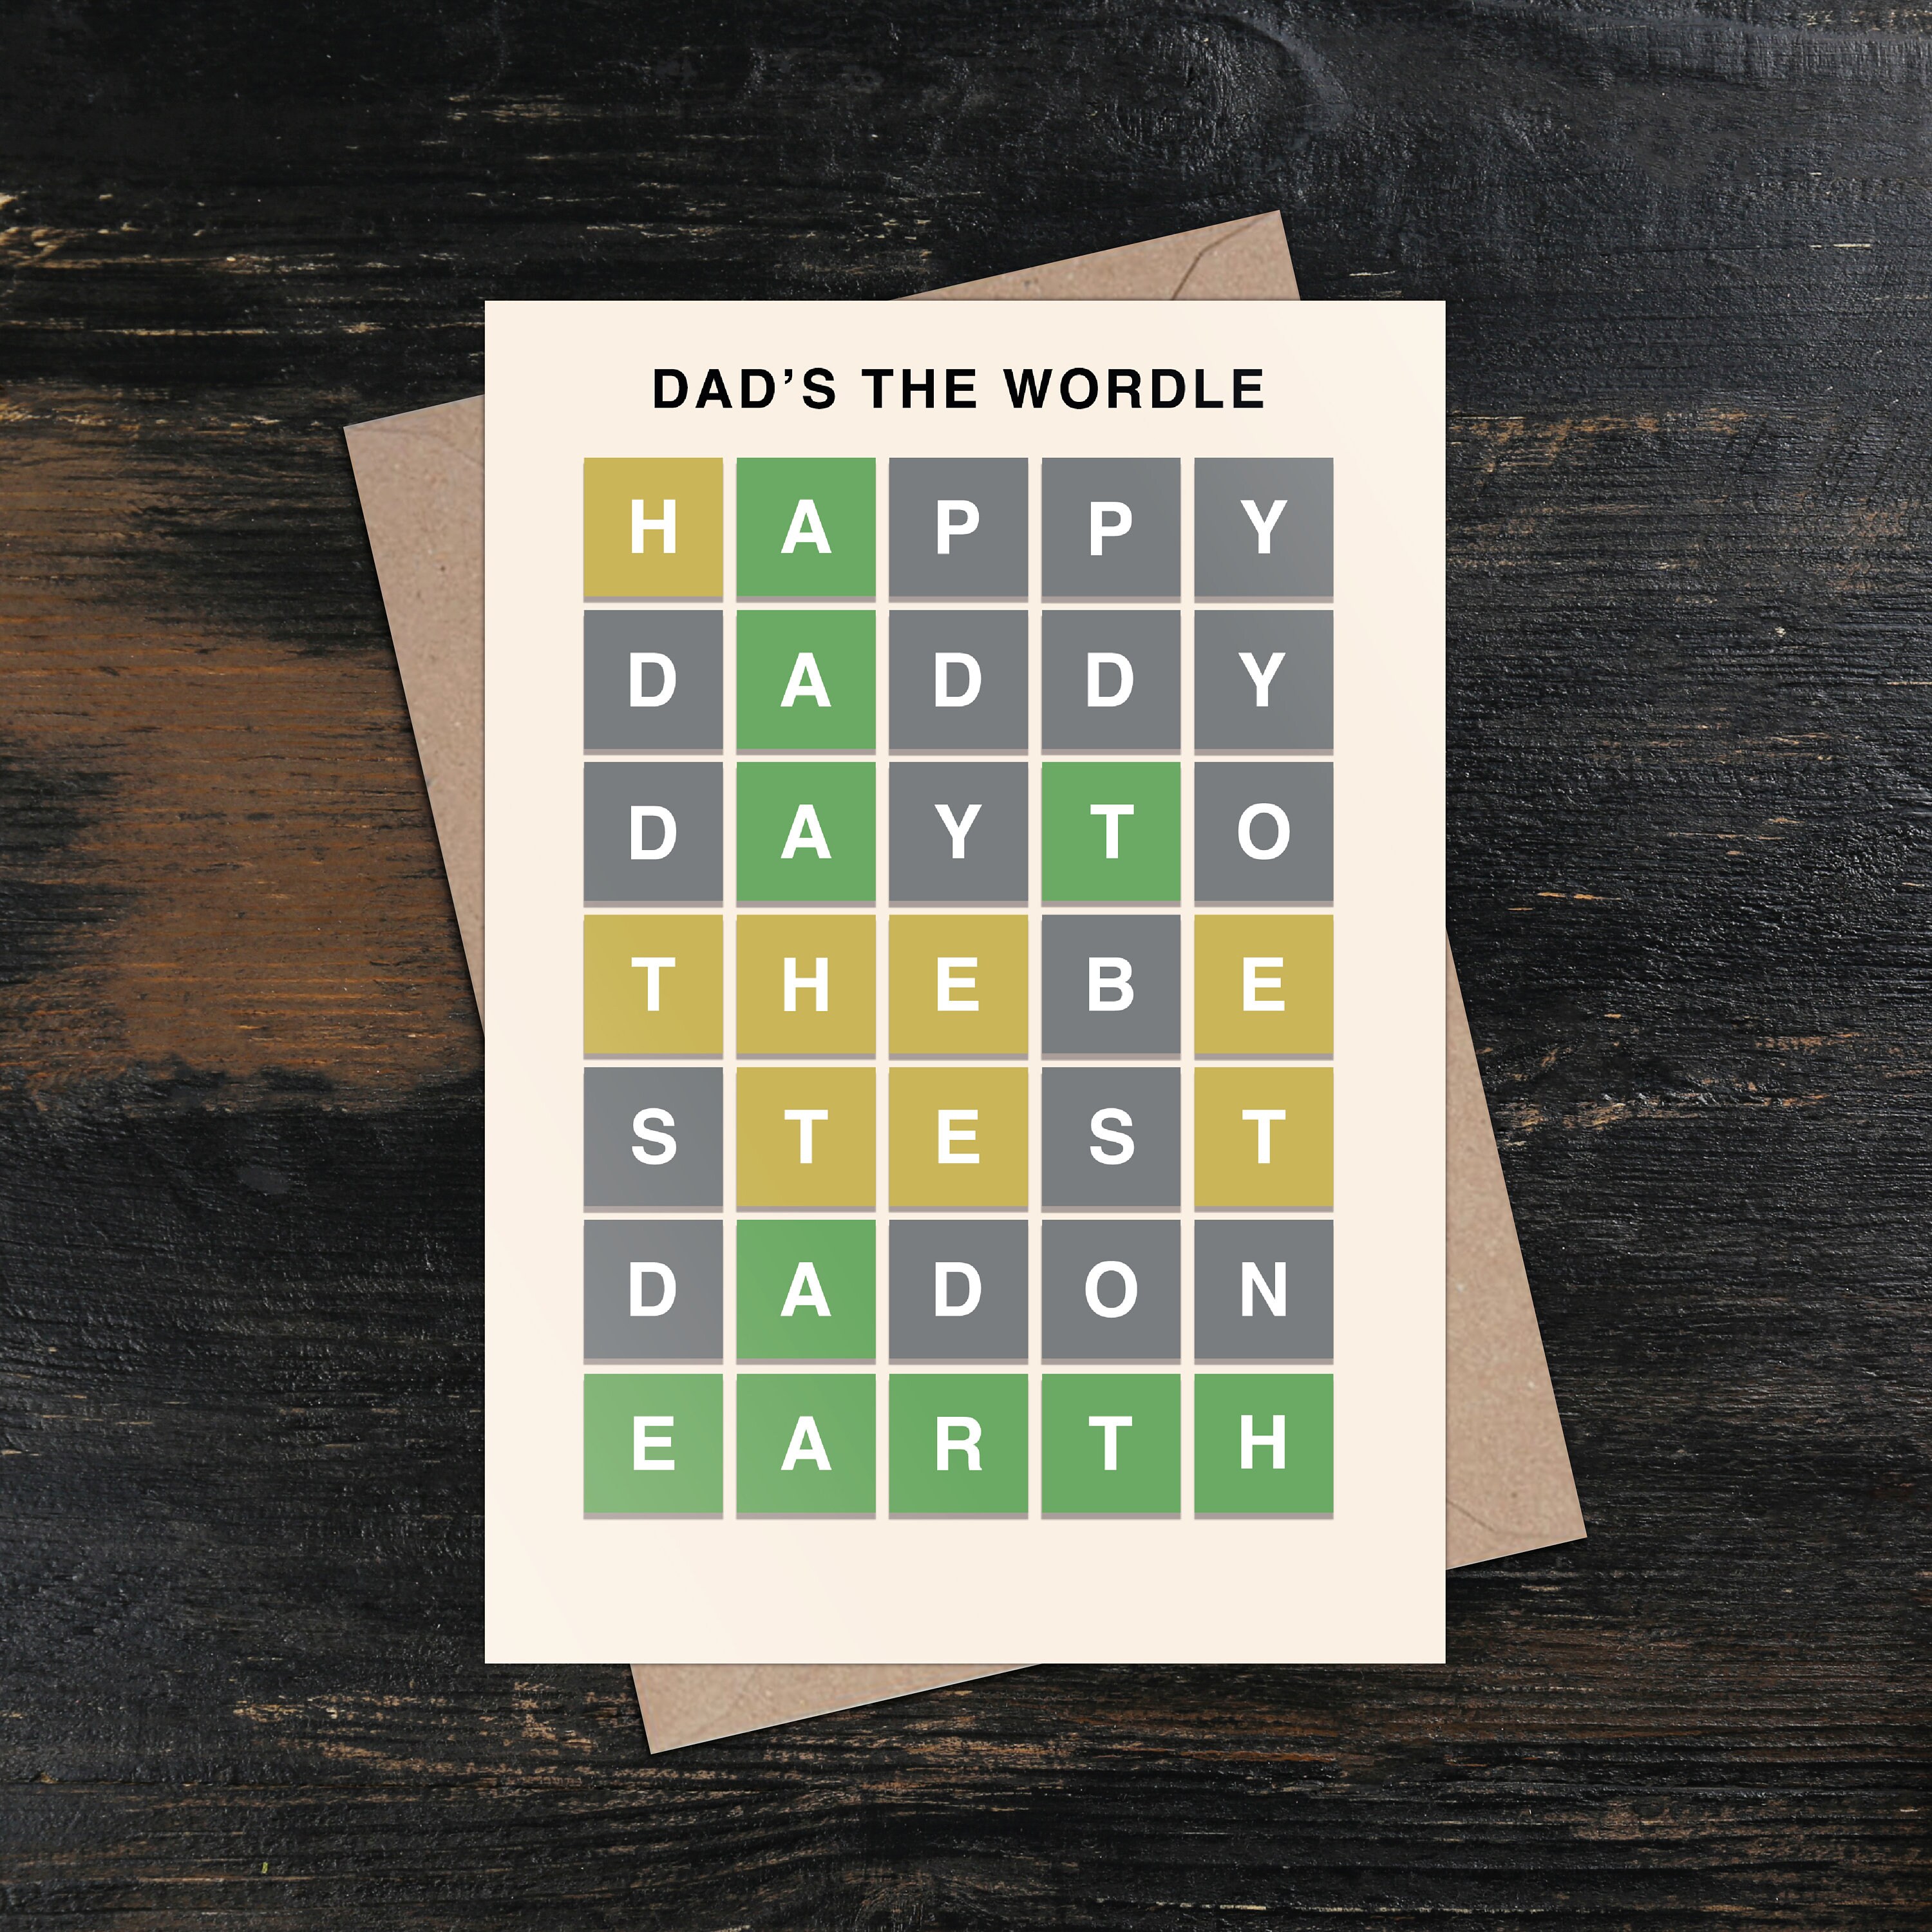 My Dad invented a new word puzzle game like Wordle mixed with a